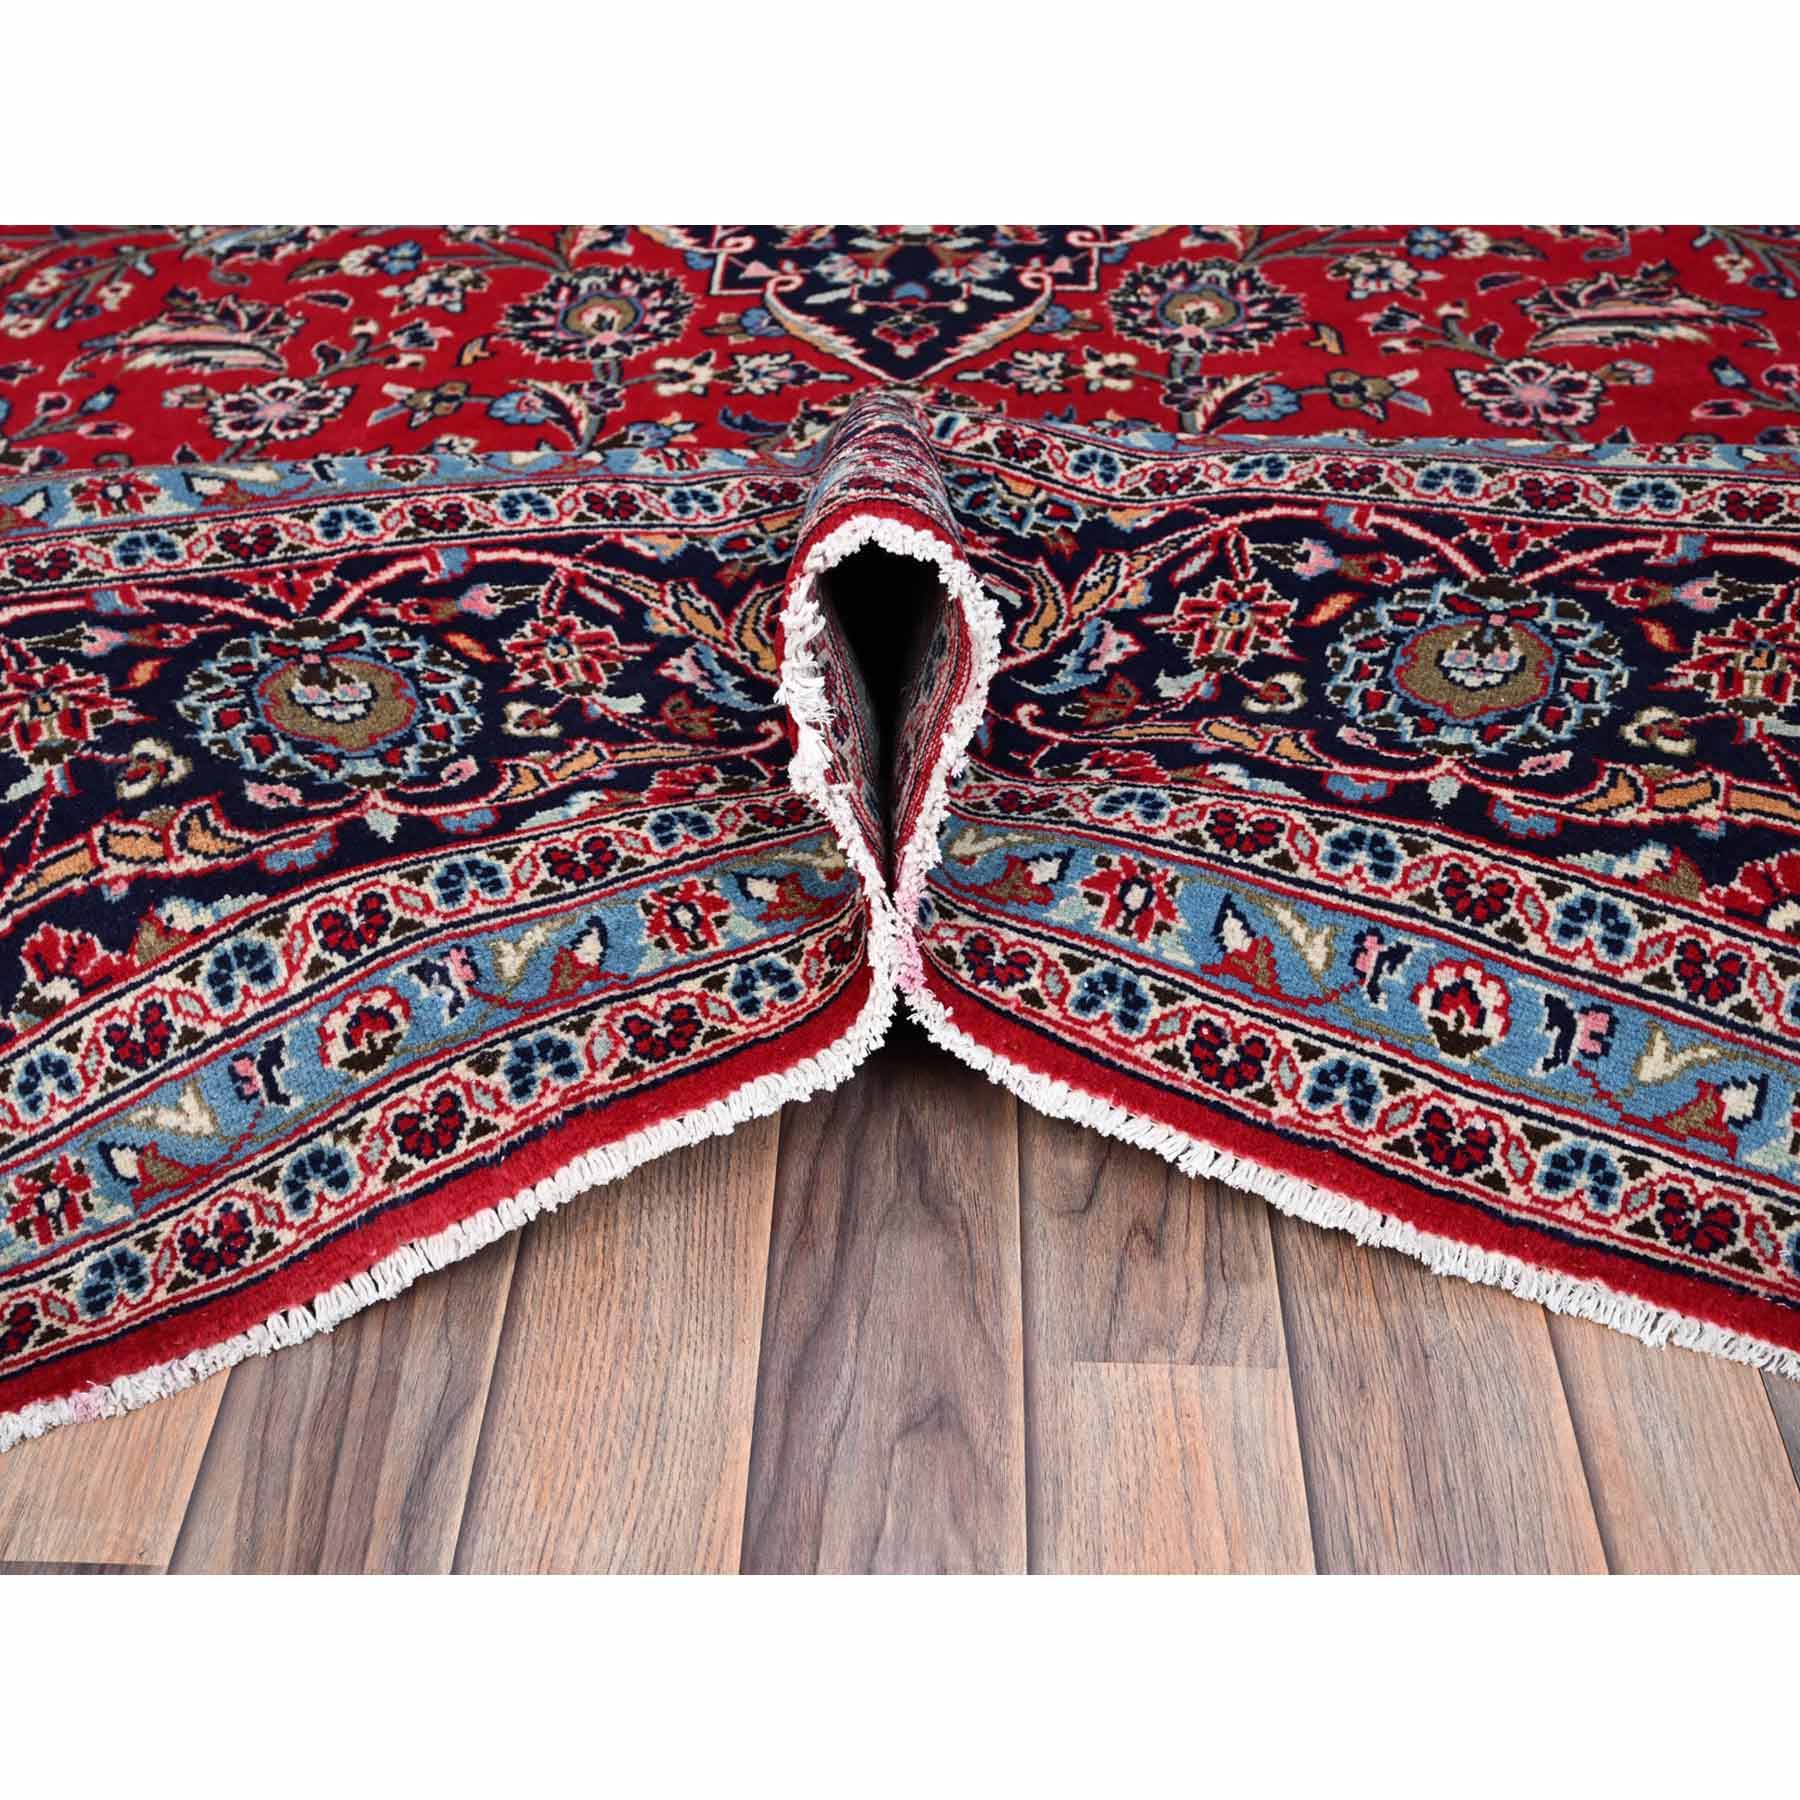 Persian-Hand-Knotted-Rug-433510